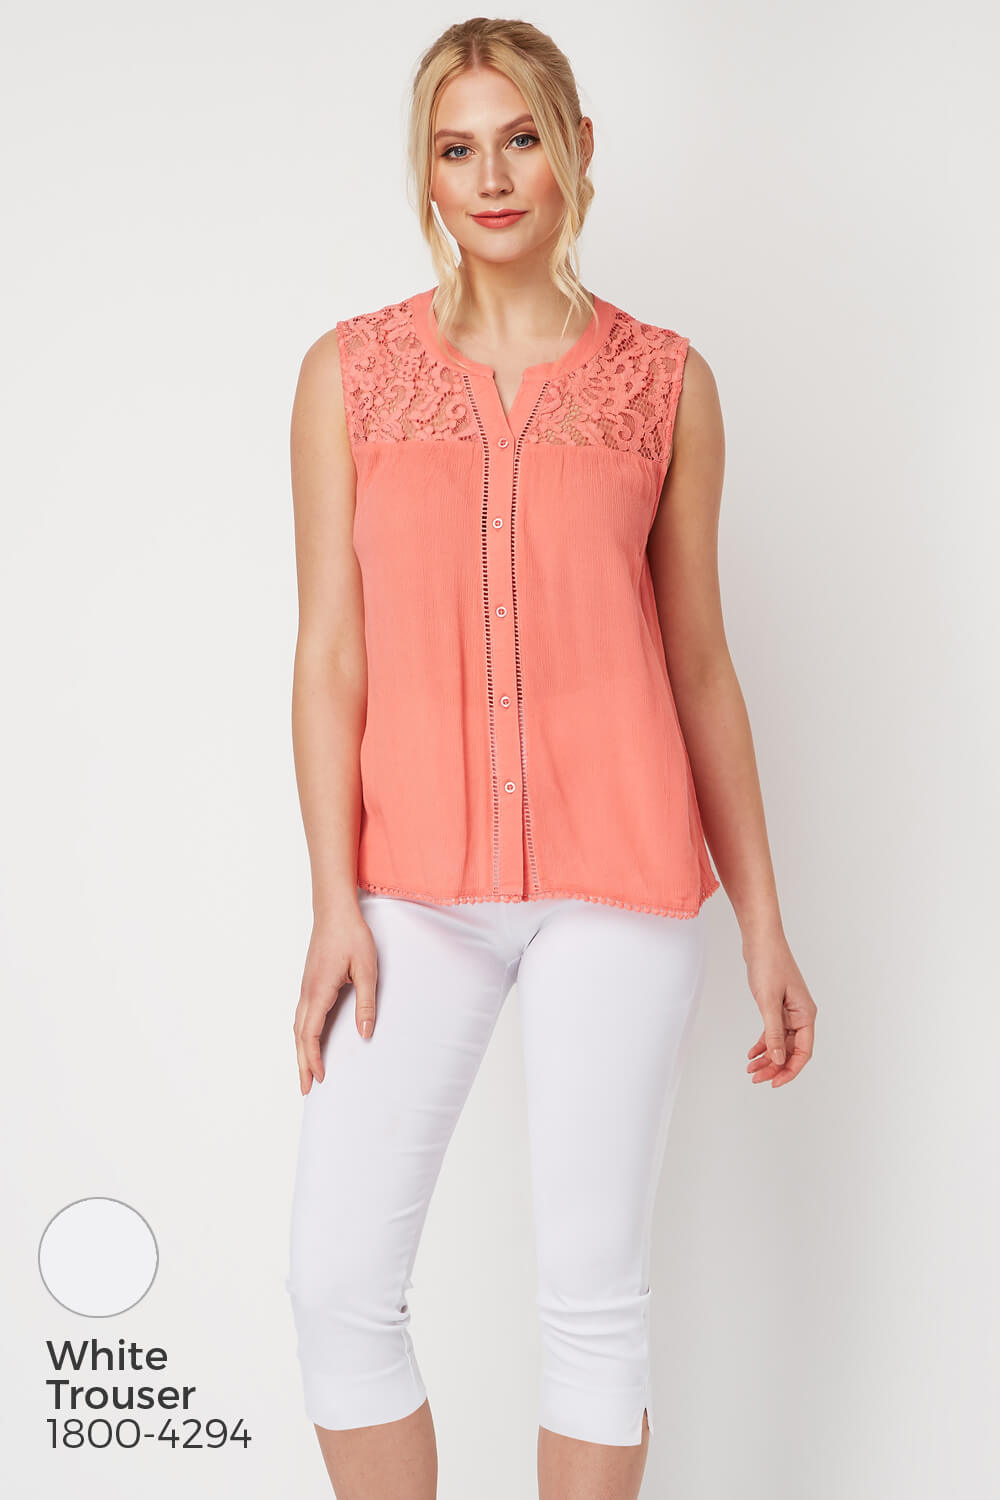 CORAL Lace Insert Button Up Blouse, Image 5 of 8